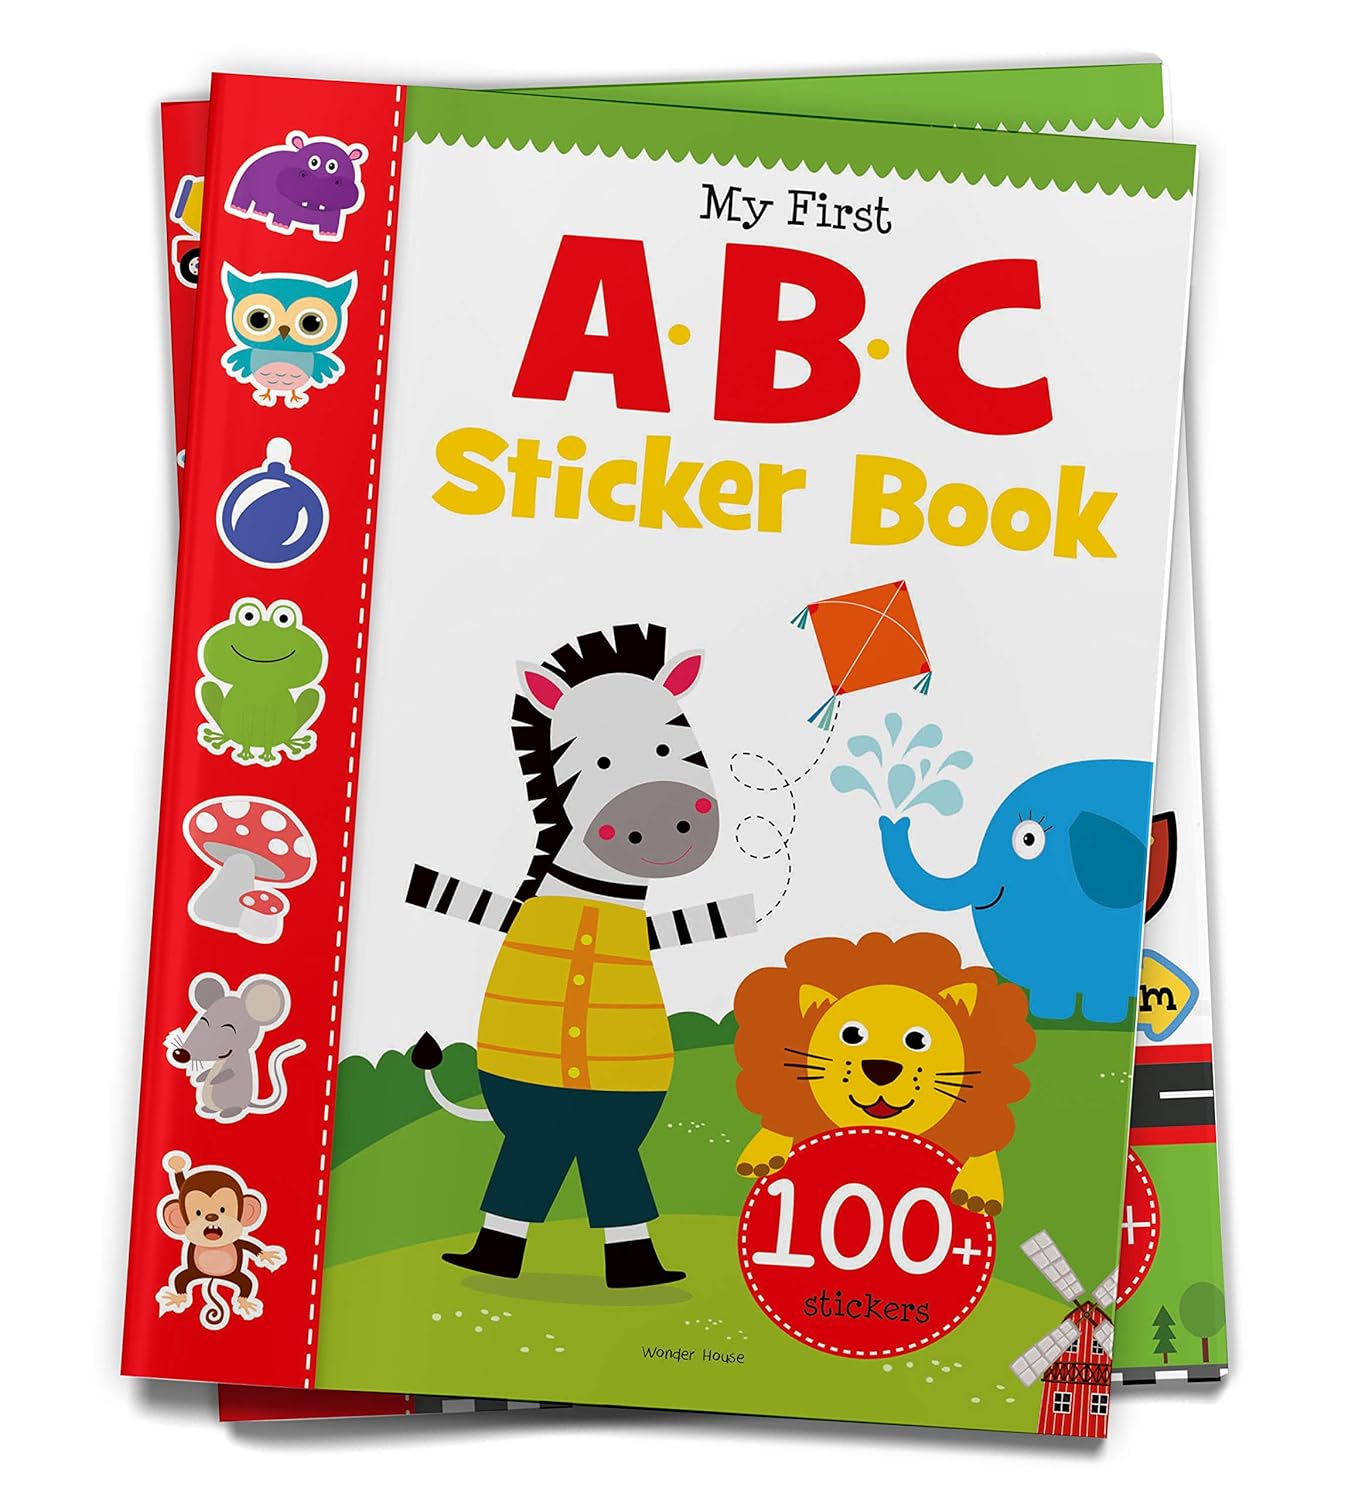 My First ABC Sticker Book: with 100+ Stickers